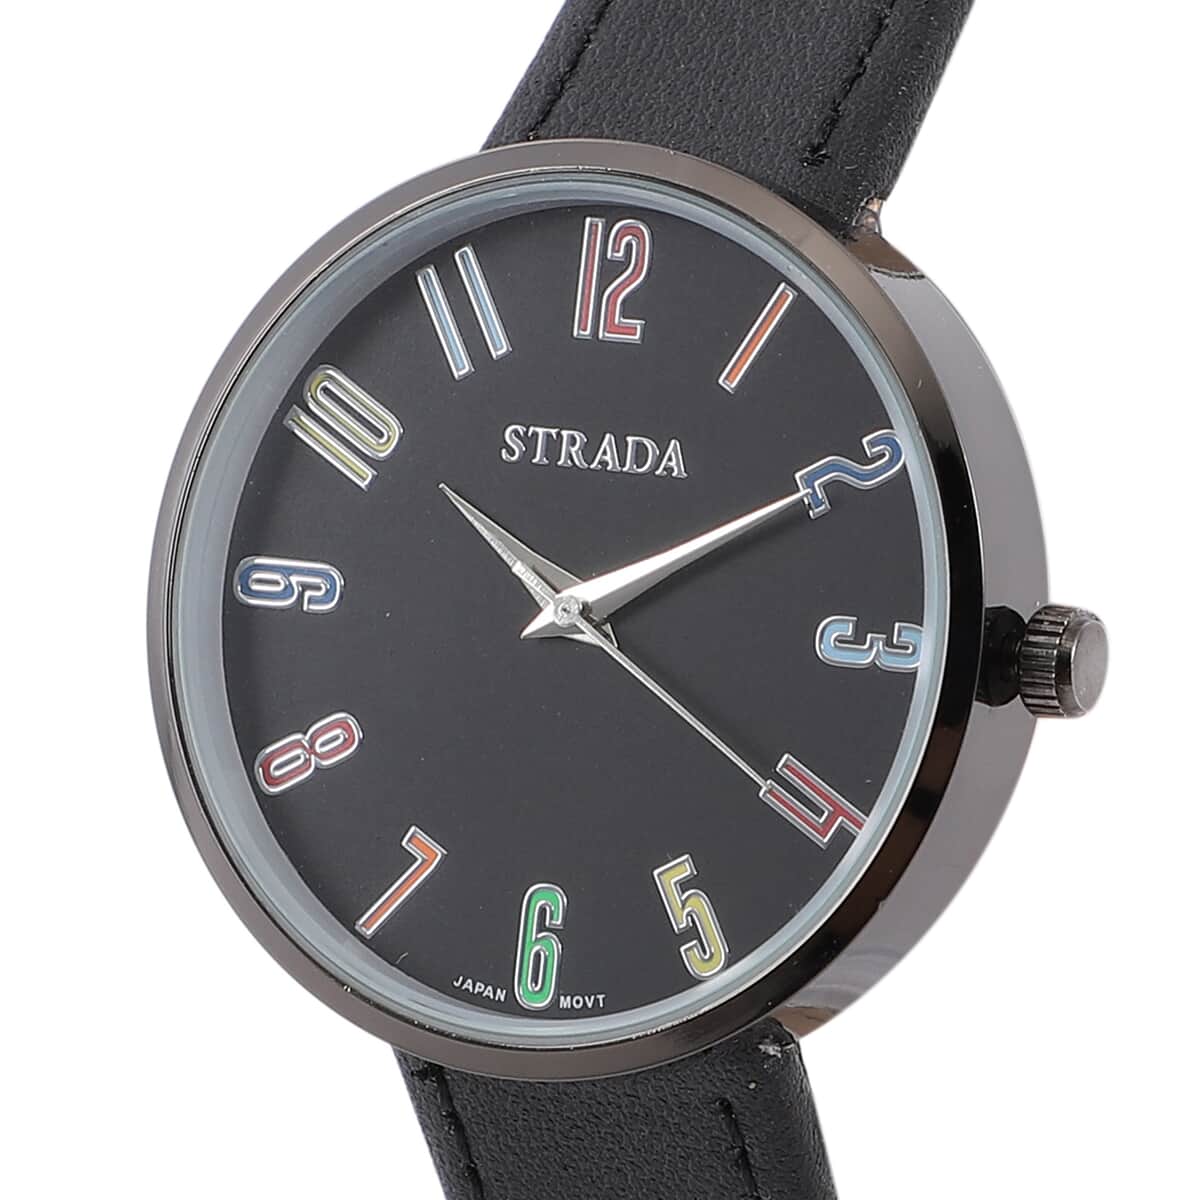 STRADA Japanese Movement Water Resistant Watch with Black Faux Leather Band image number 3